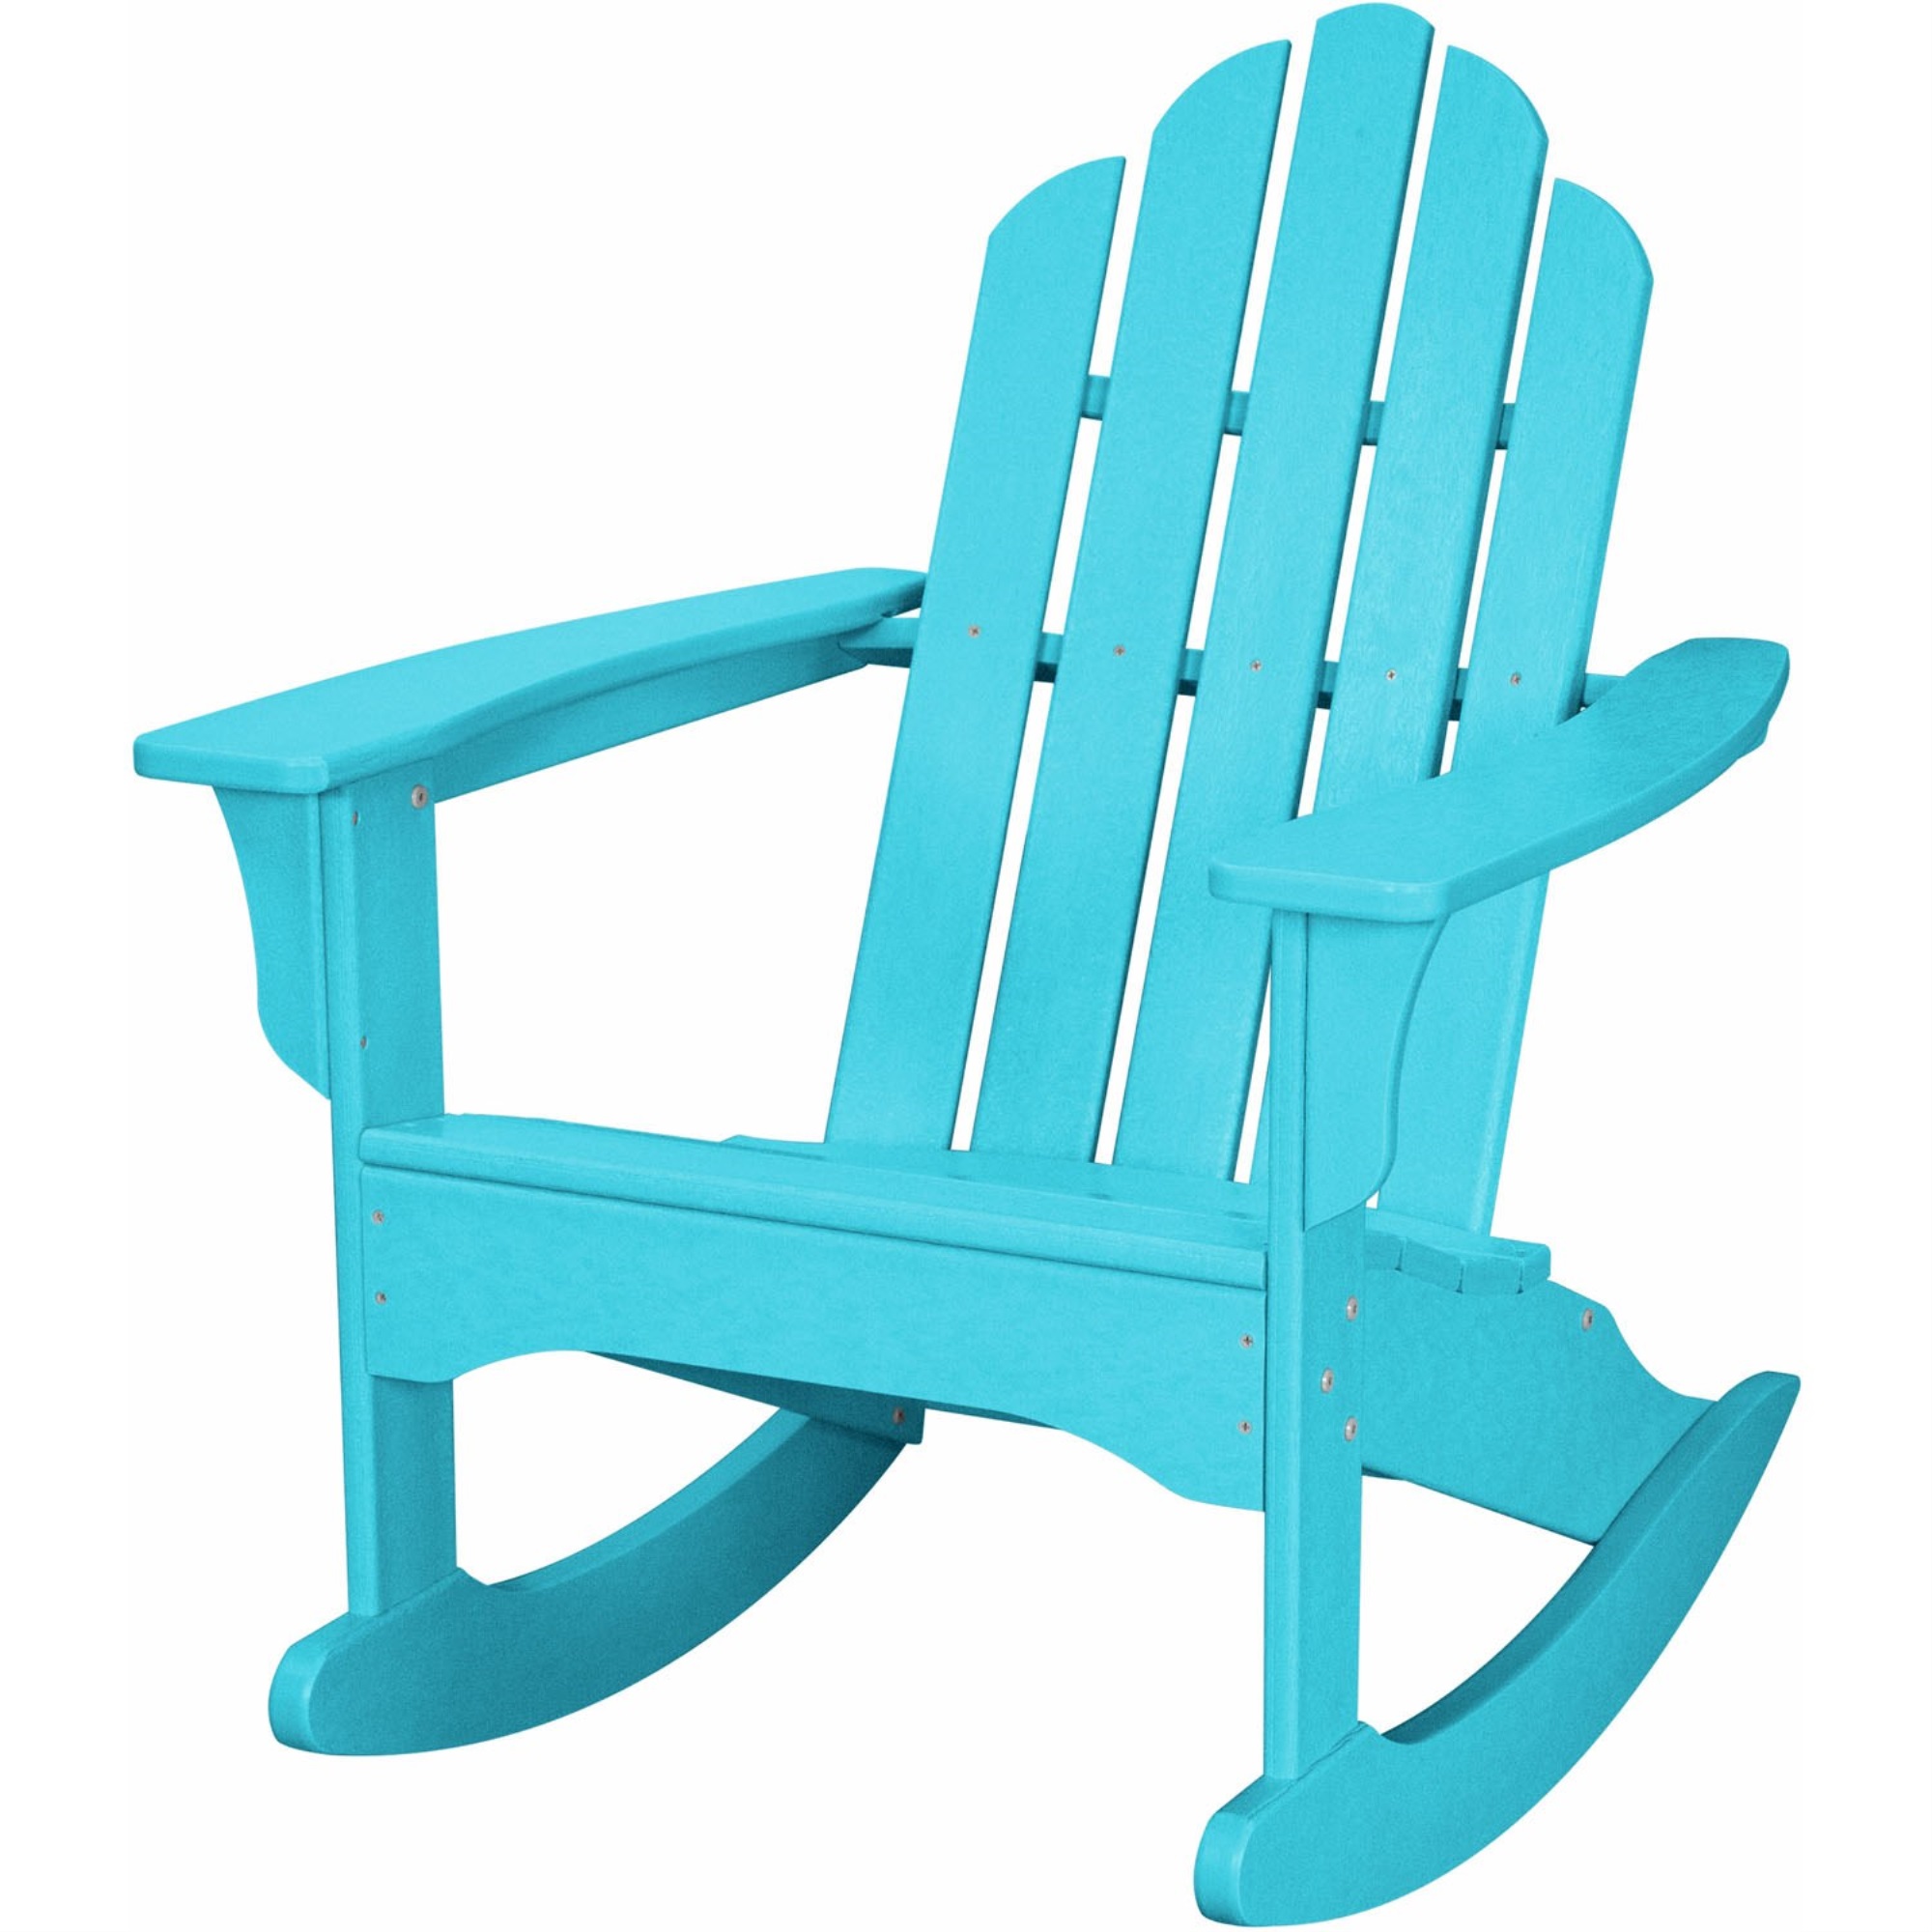 Hanover All-Weather Adirondack Rocking Chair in Aruba - image 1 of 4